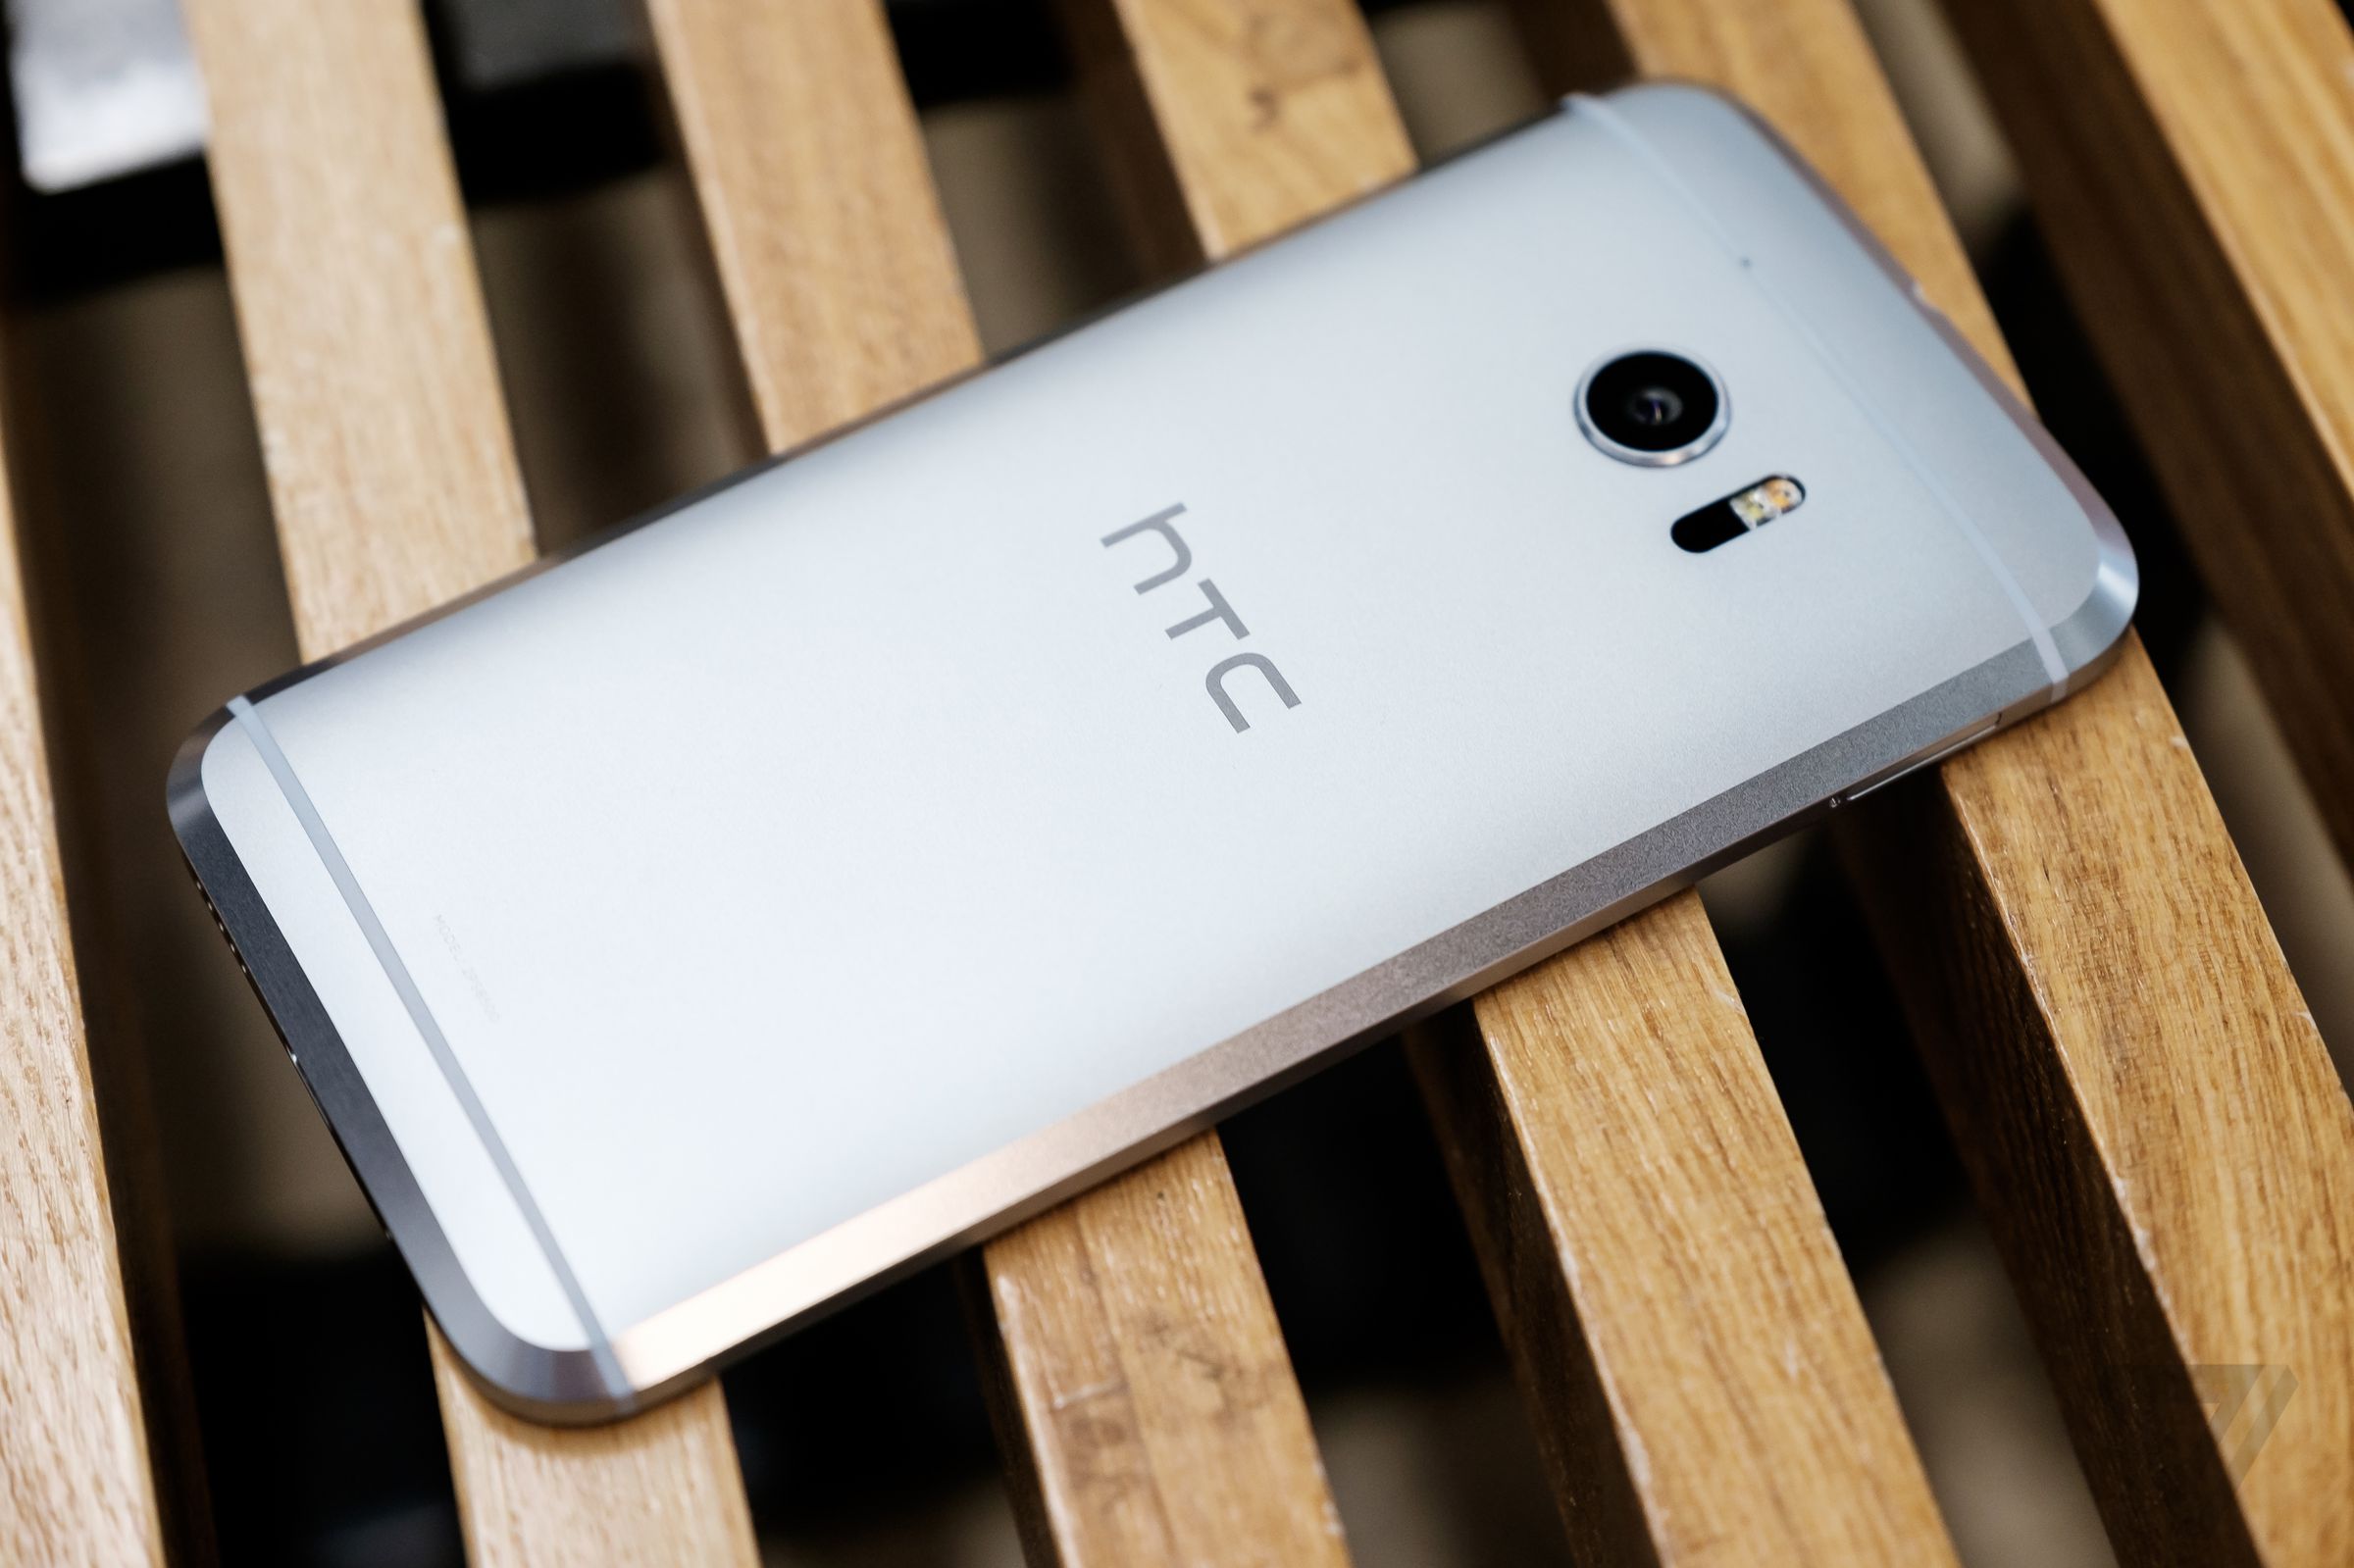 HTC 10 hands-on photos